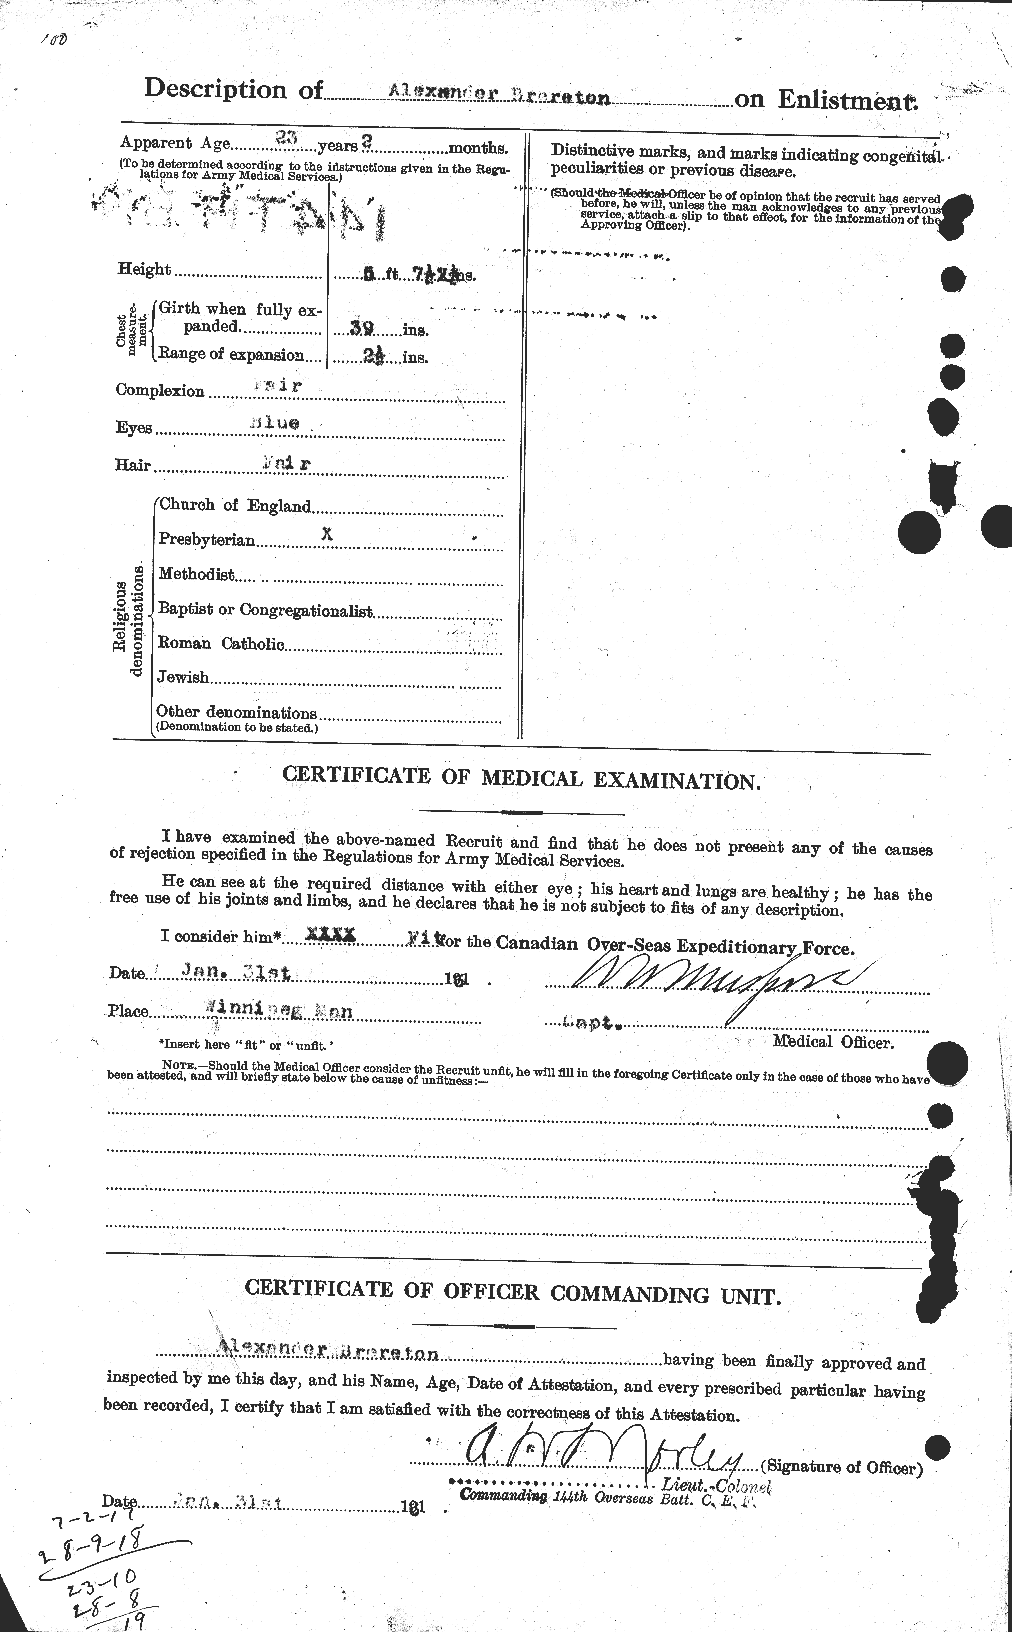 Personnel Records of the First World War - CEF 262678b